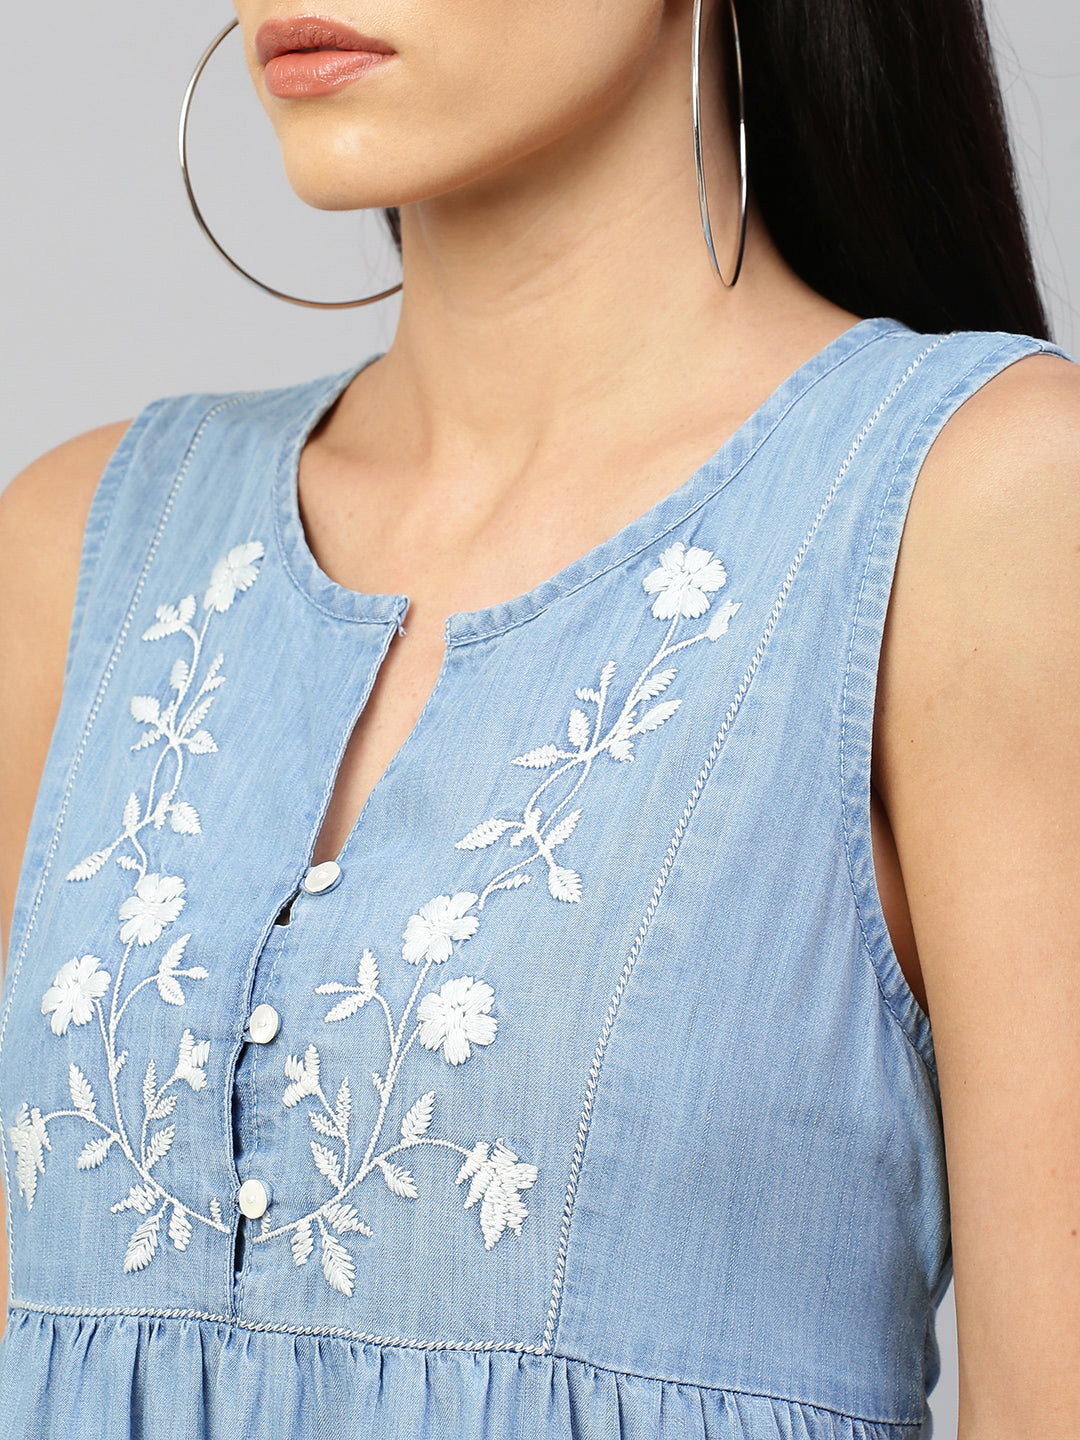 Light Weight Denim Tiered Dress With Embroidered Yoke